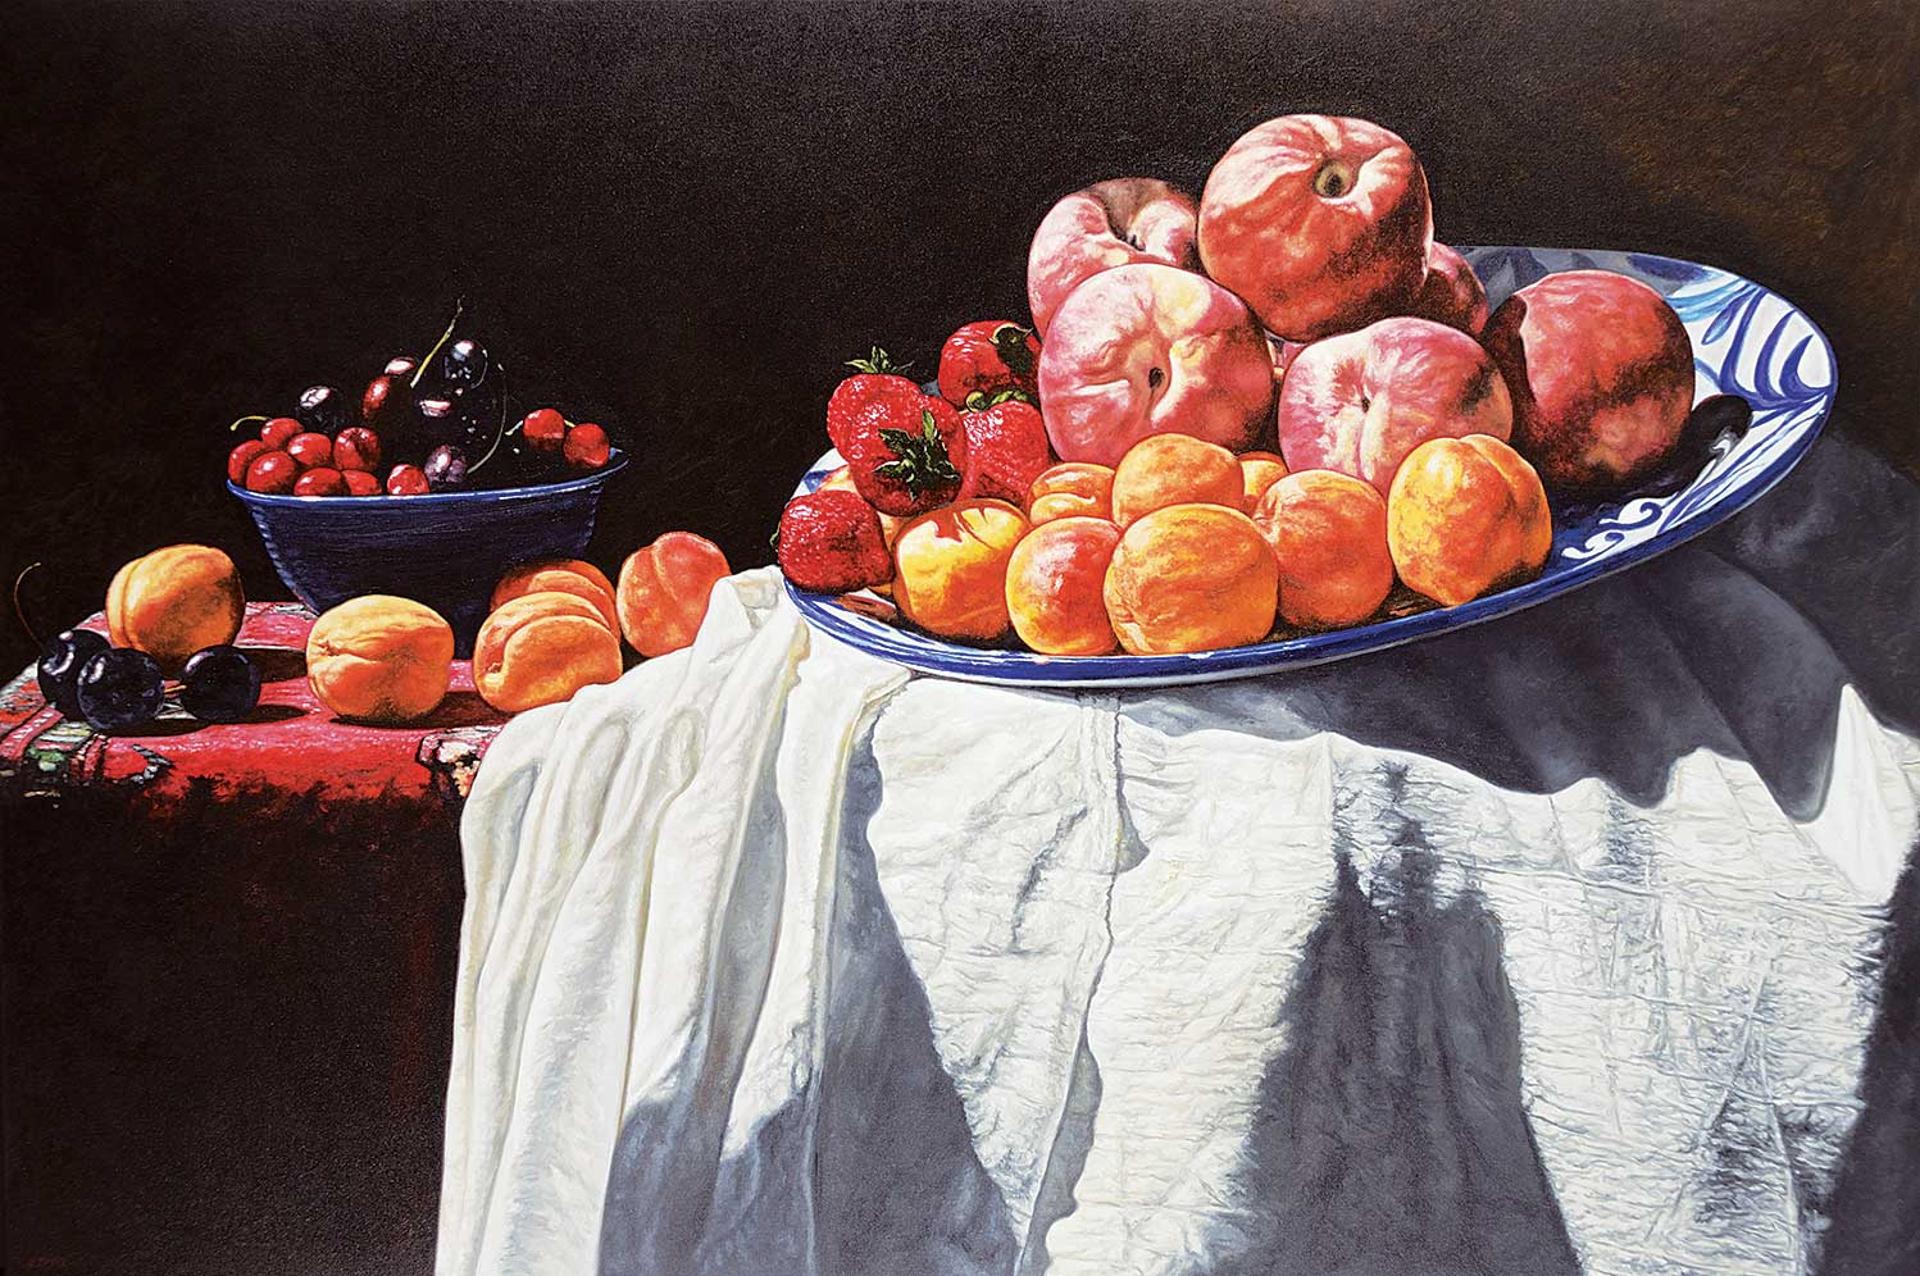 Robert Lemay (1961) - Fruit and Portuguese Plate